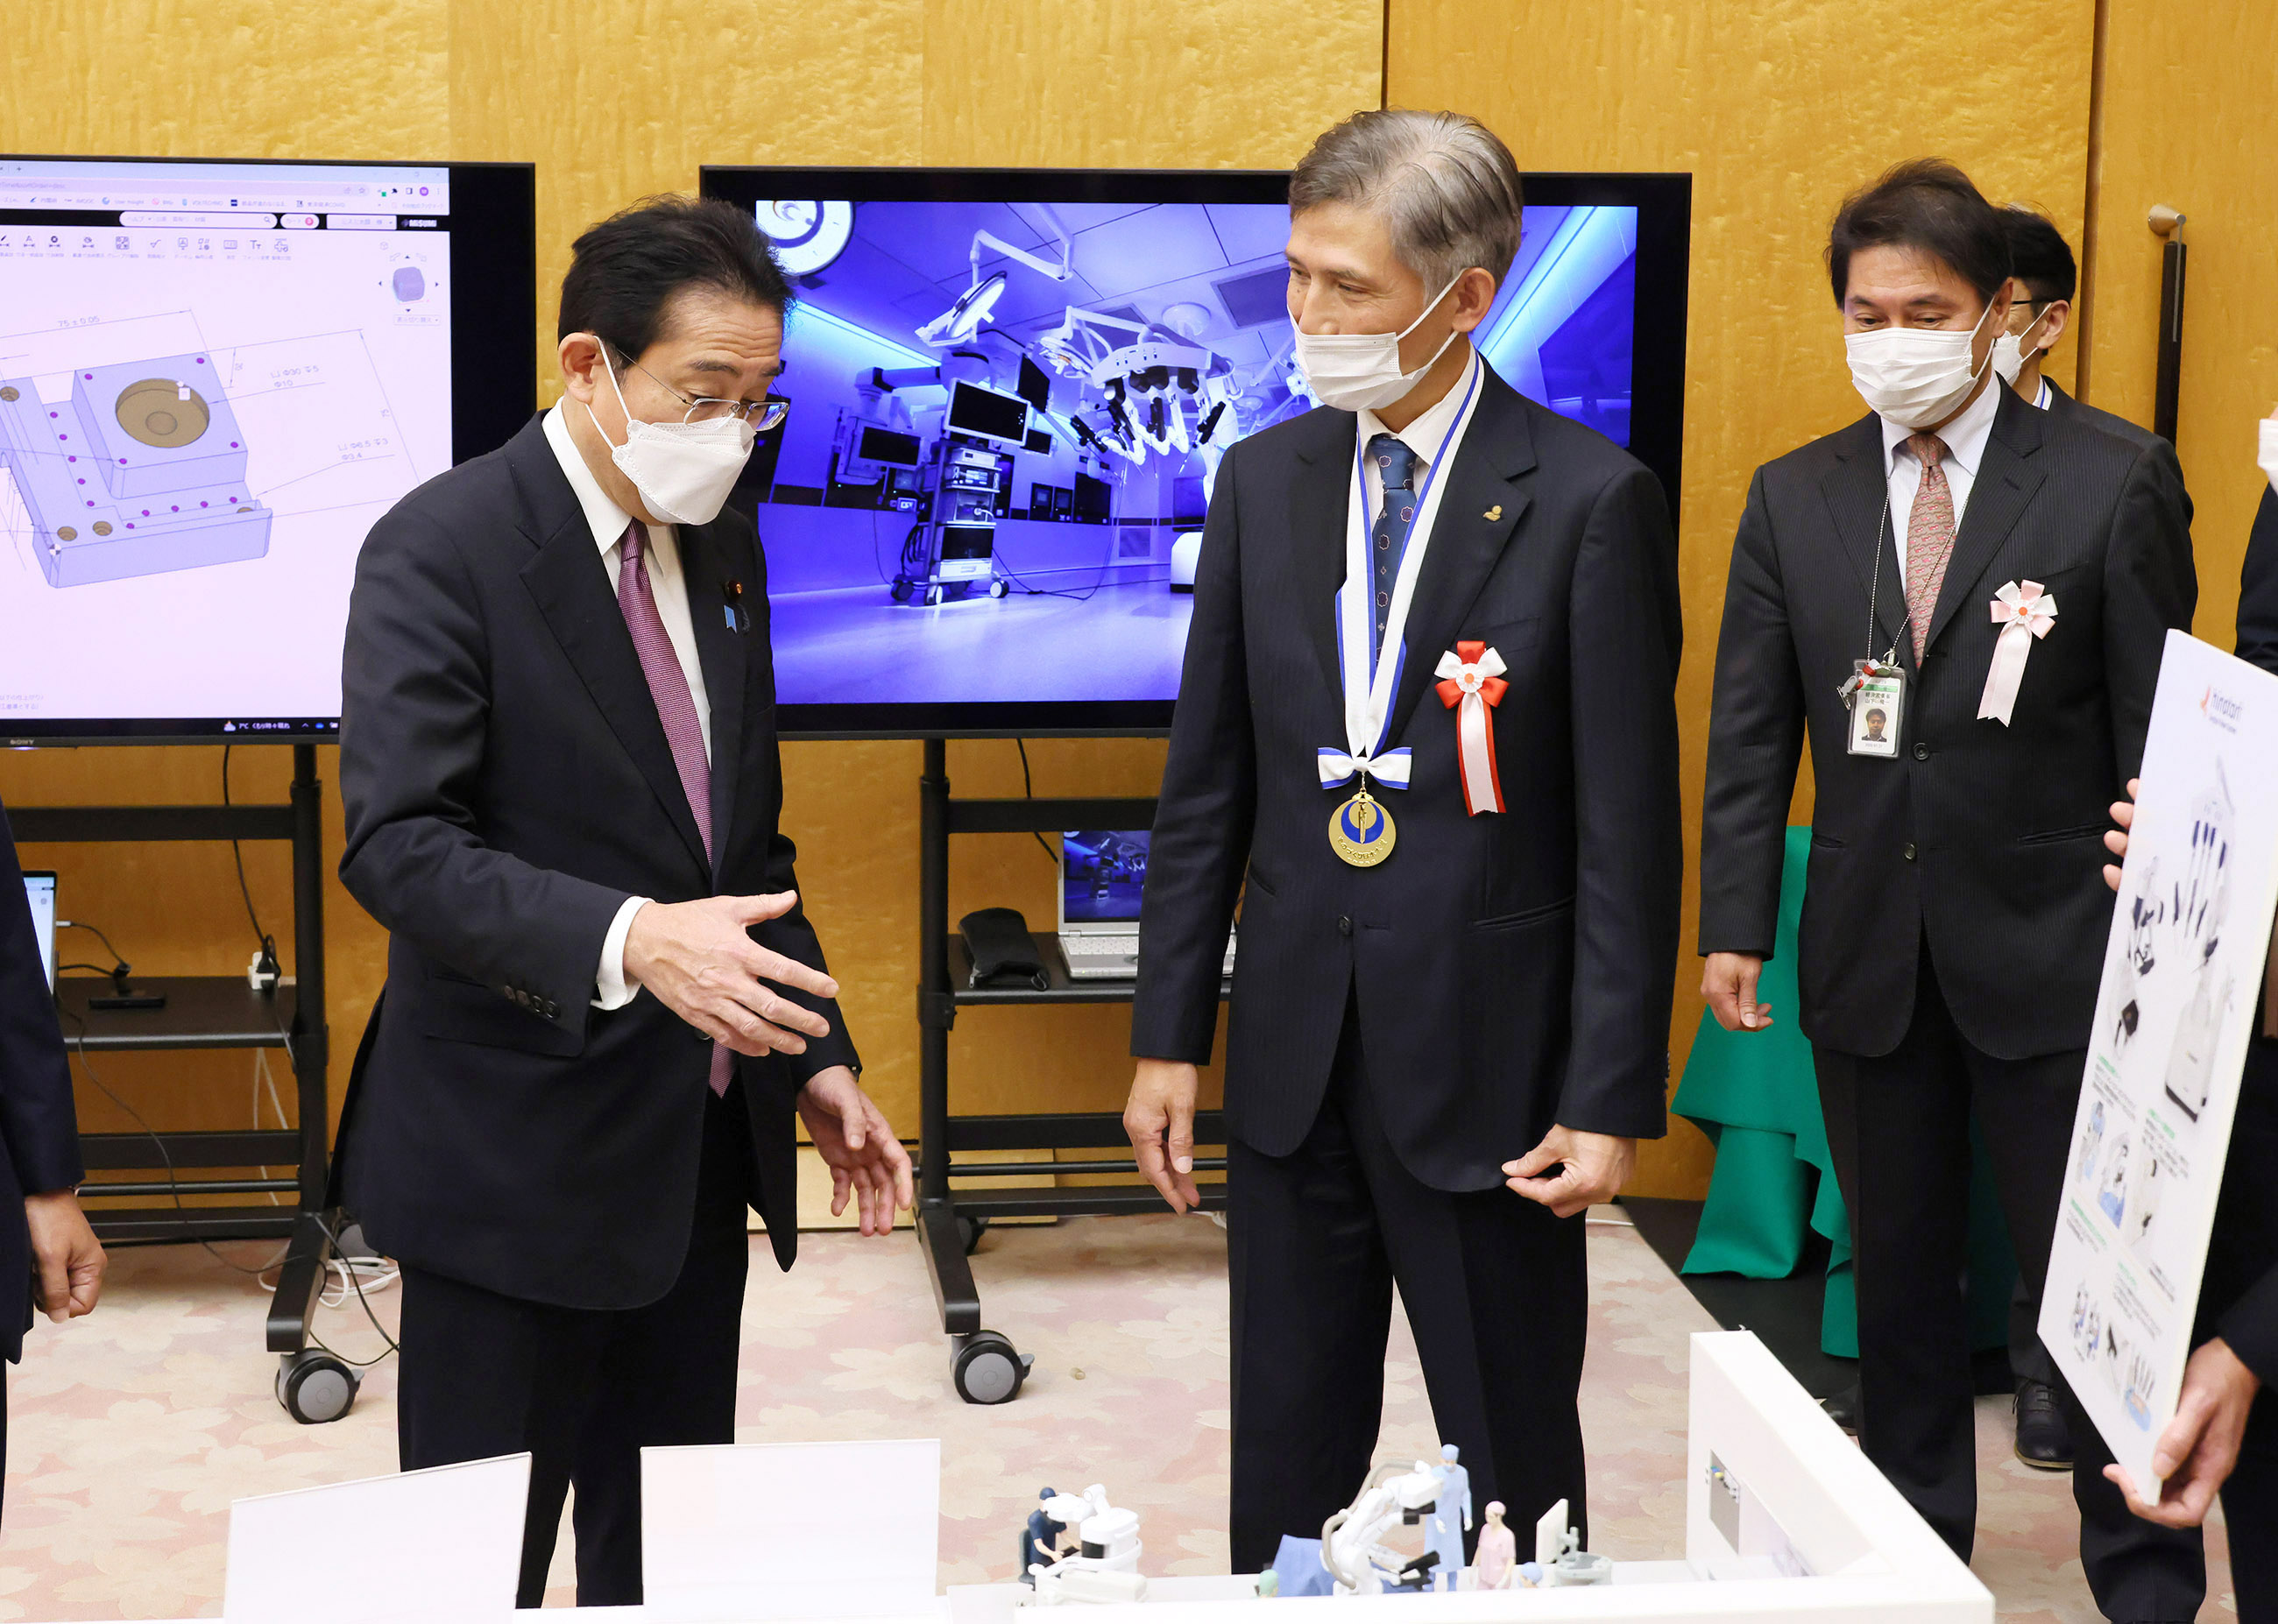 Award Ceremony and Exhibition for the Prime Minister’s Prize of the Monodzukuri Nippon Grand Award